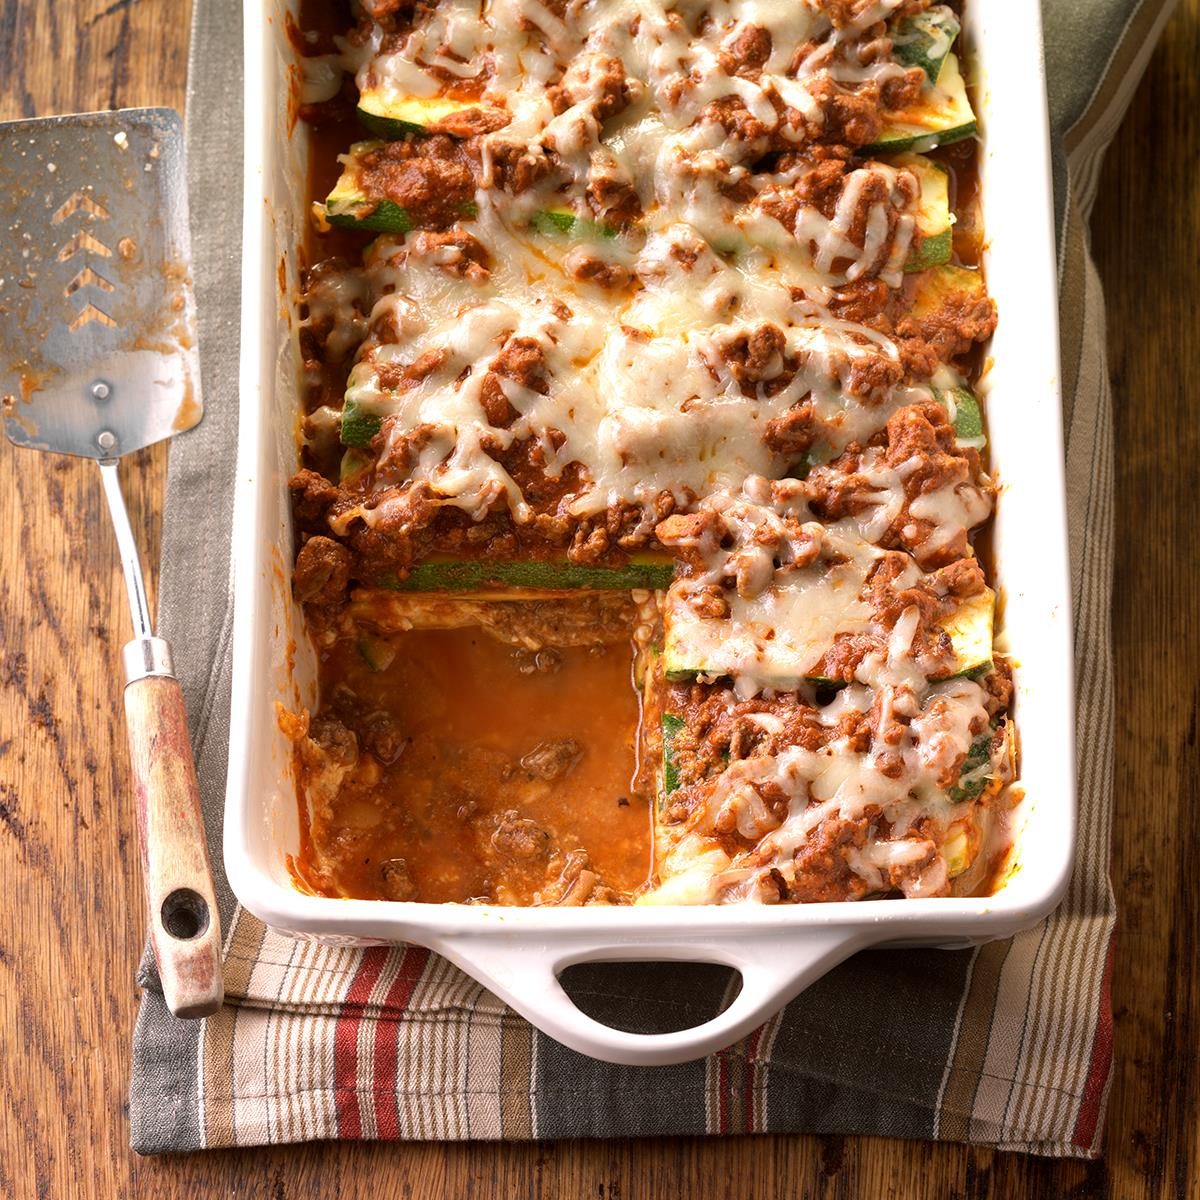 25 Delicious Casseroles For People With Diabetes Taste Of Home